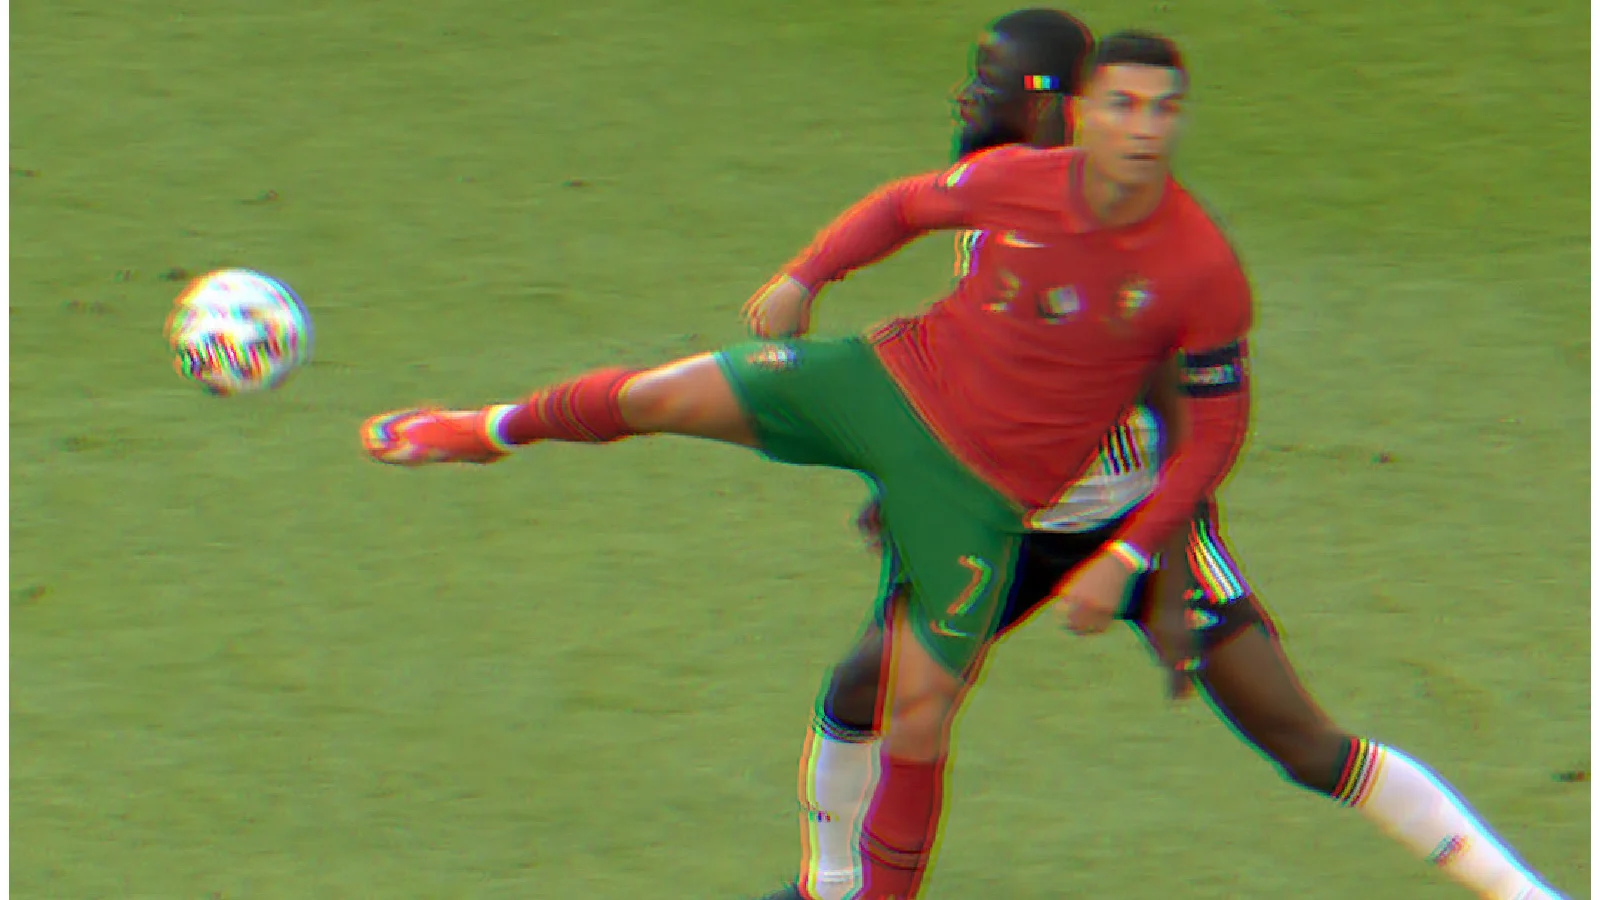 Cristiano Ronaldo executes a back heel no-look pass to deceive Antonio Rudiger in the game against Germany